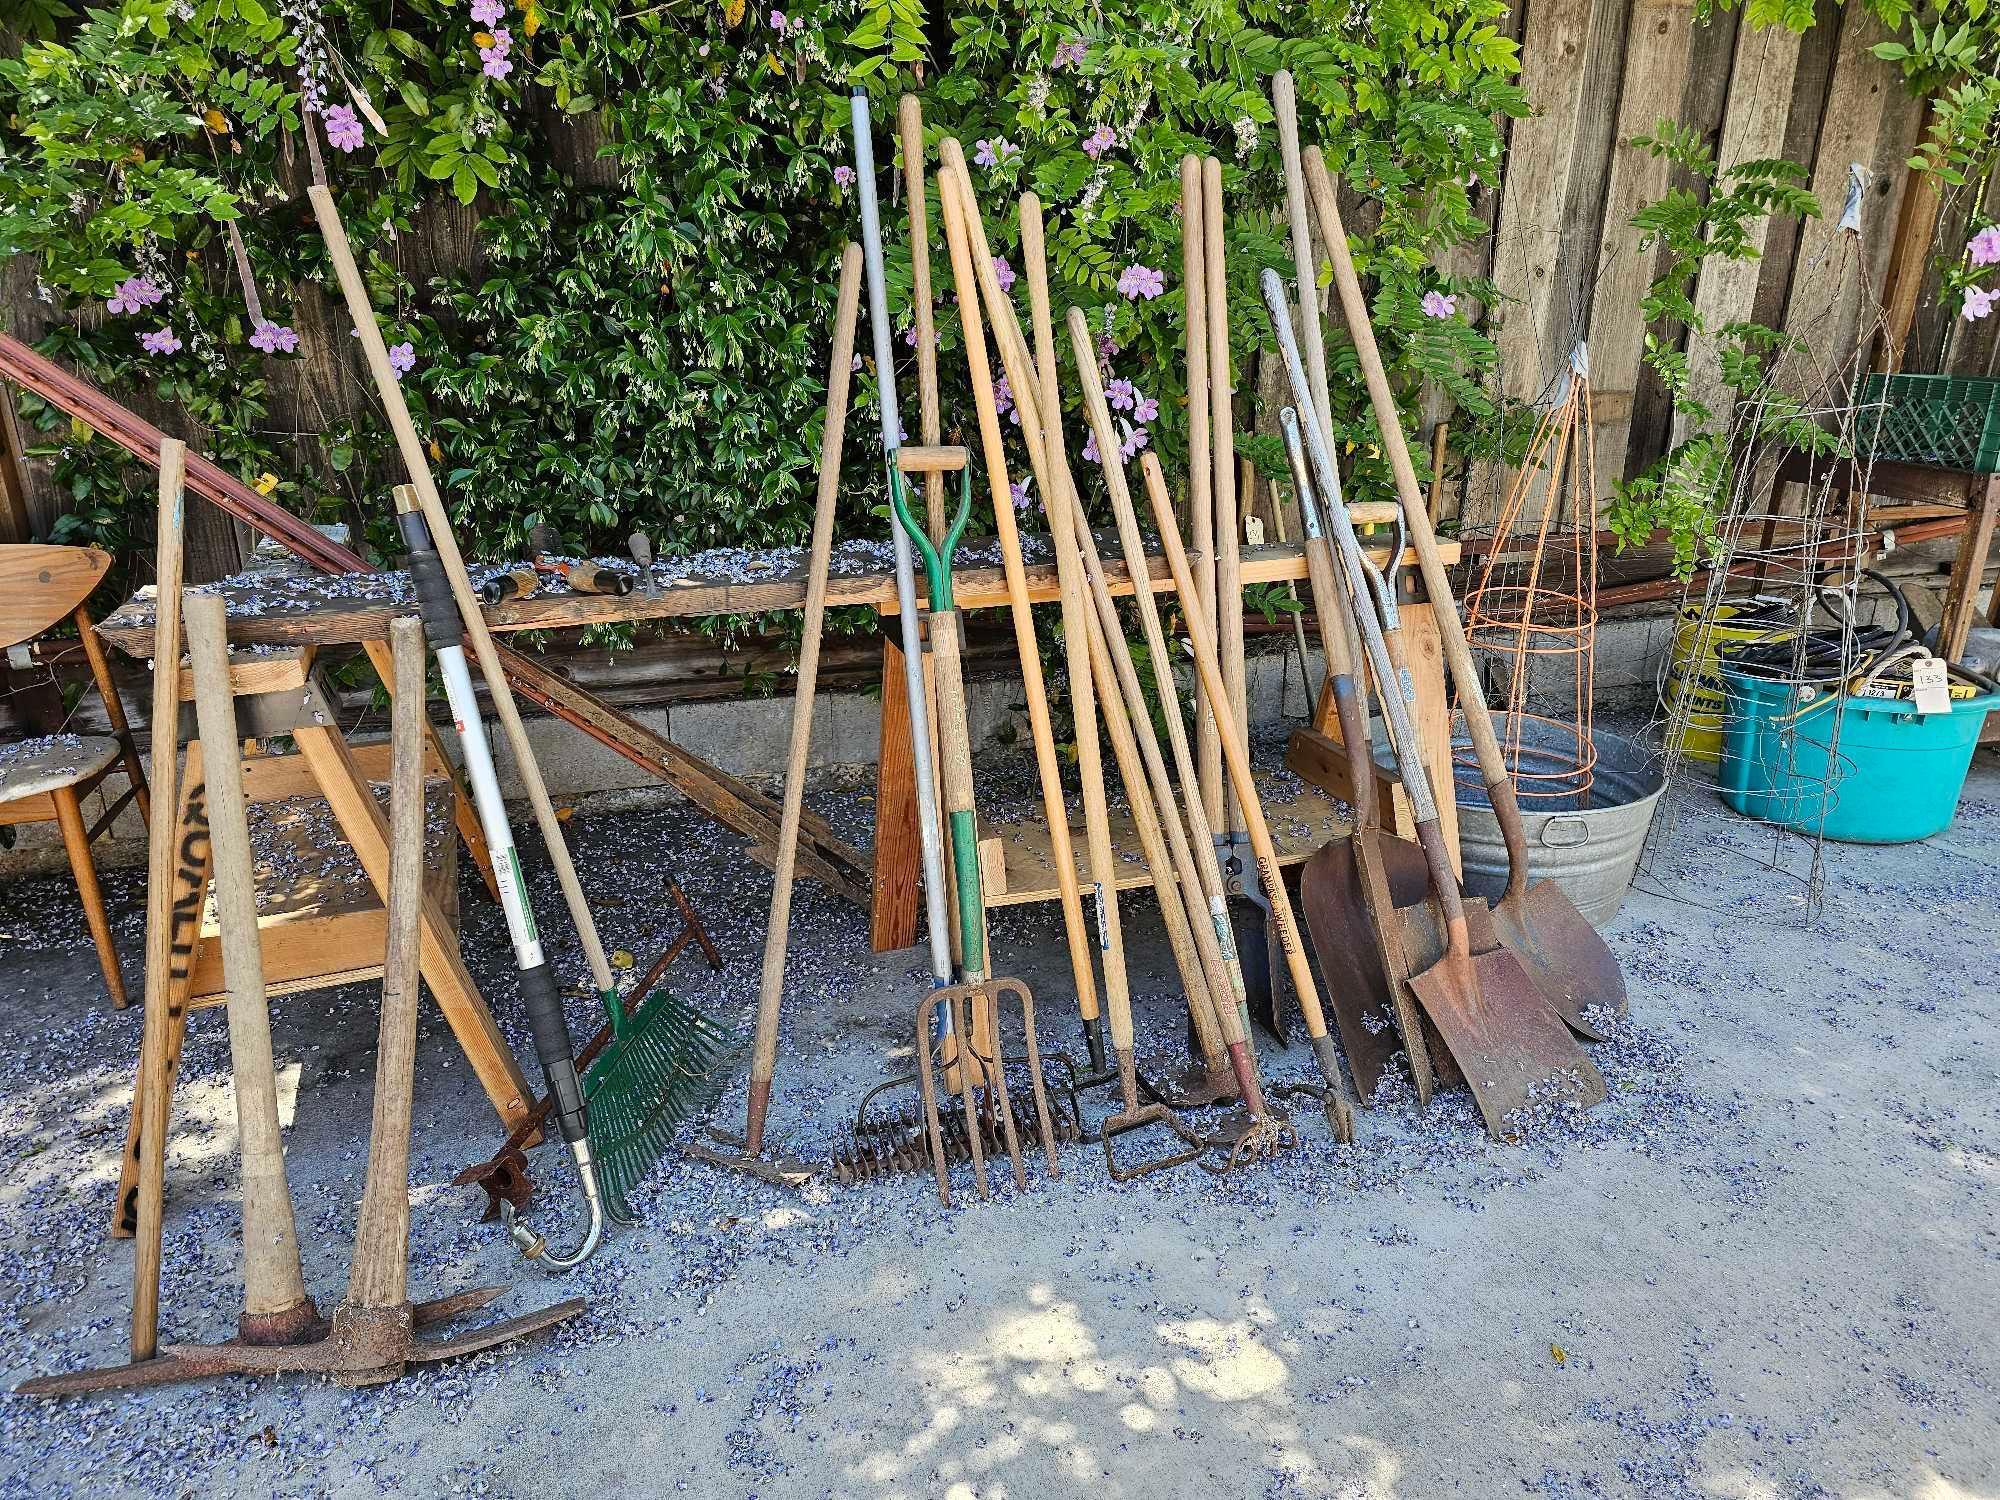 LARGE GROUP OF OUTDOOR SHOVELS